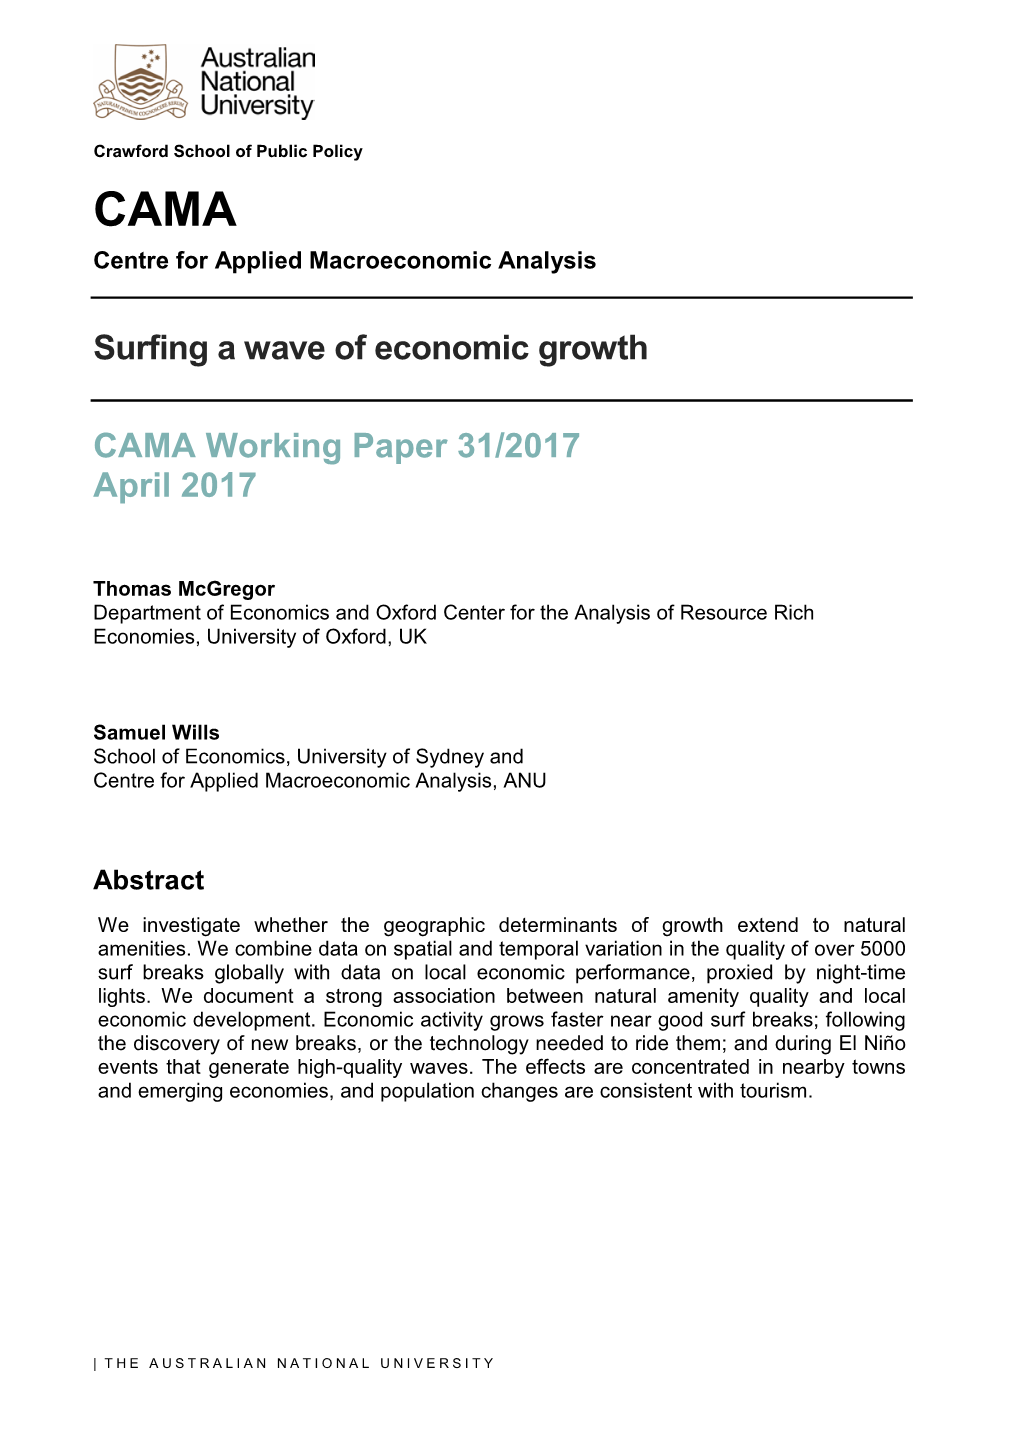 Surfing a Wave of Economic Growth CAMA Working Paper 31/2017 April 2017